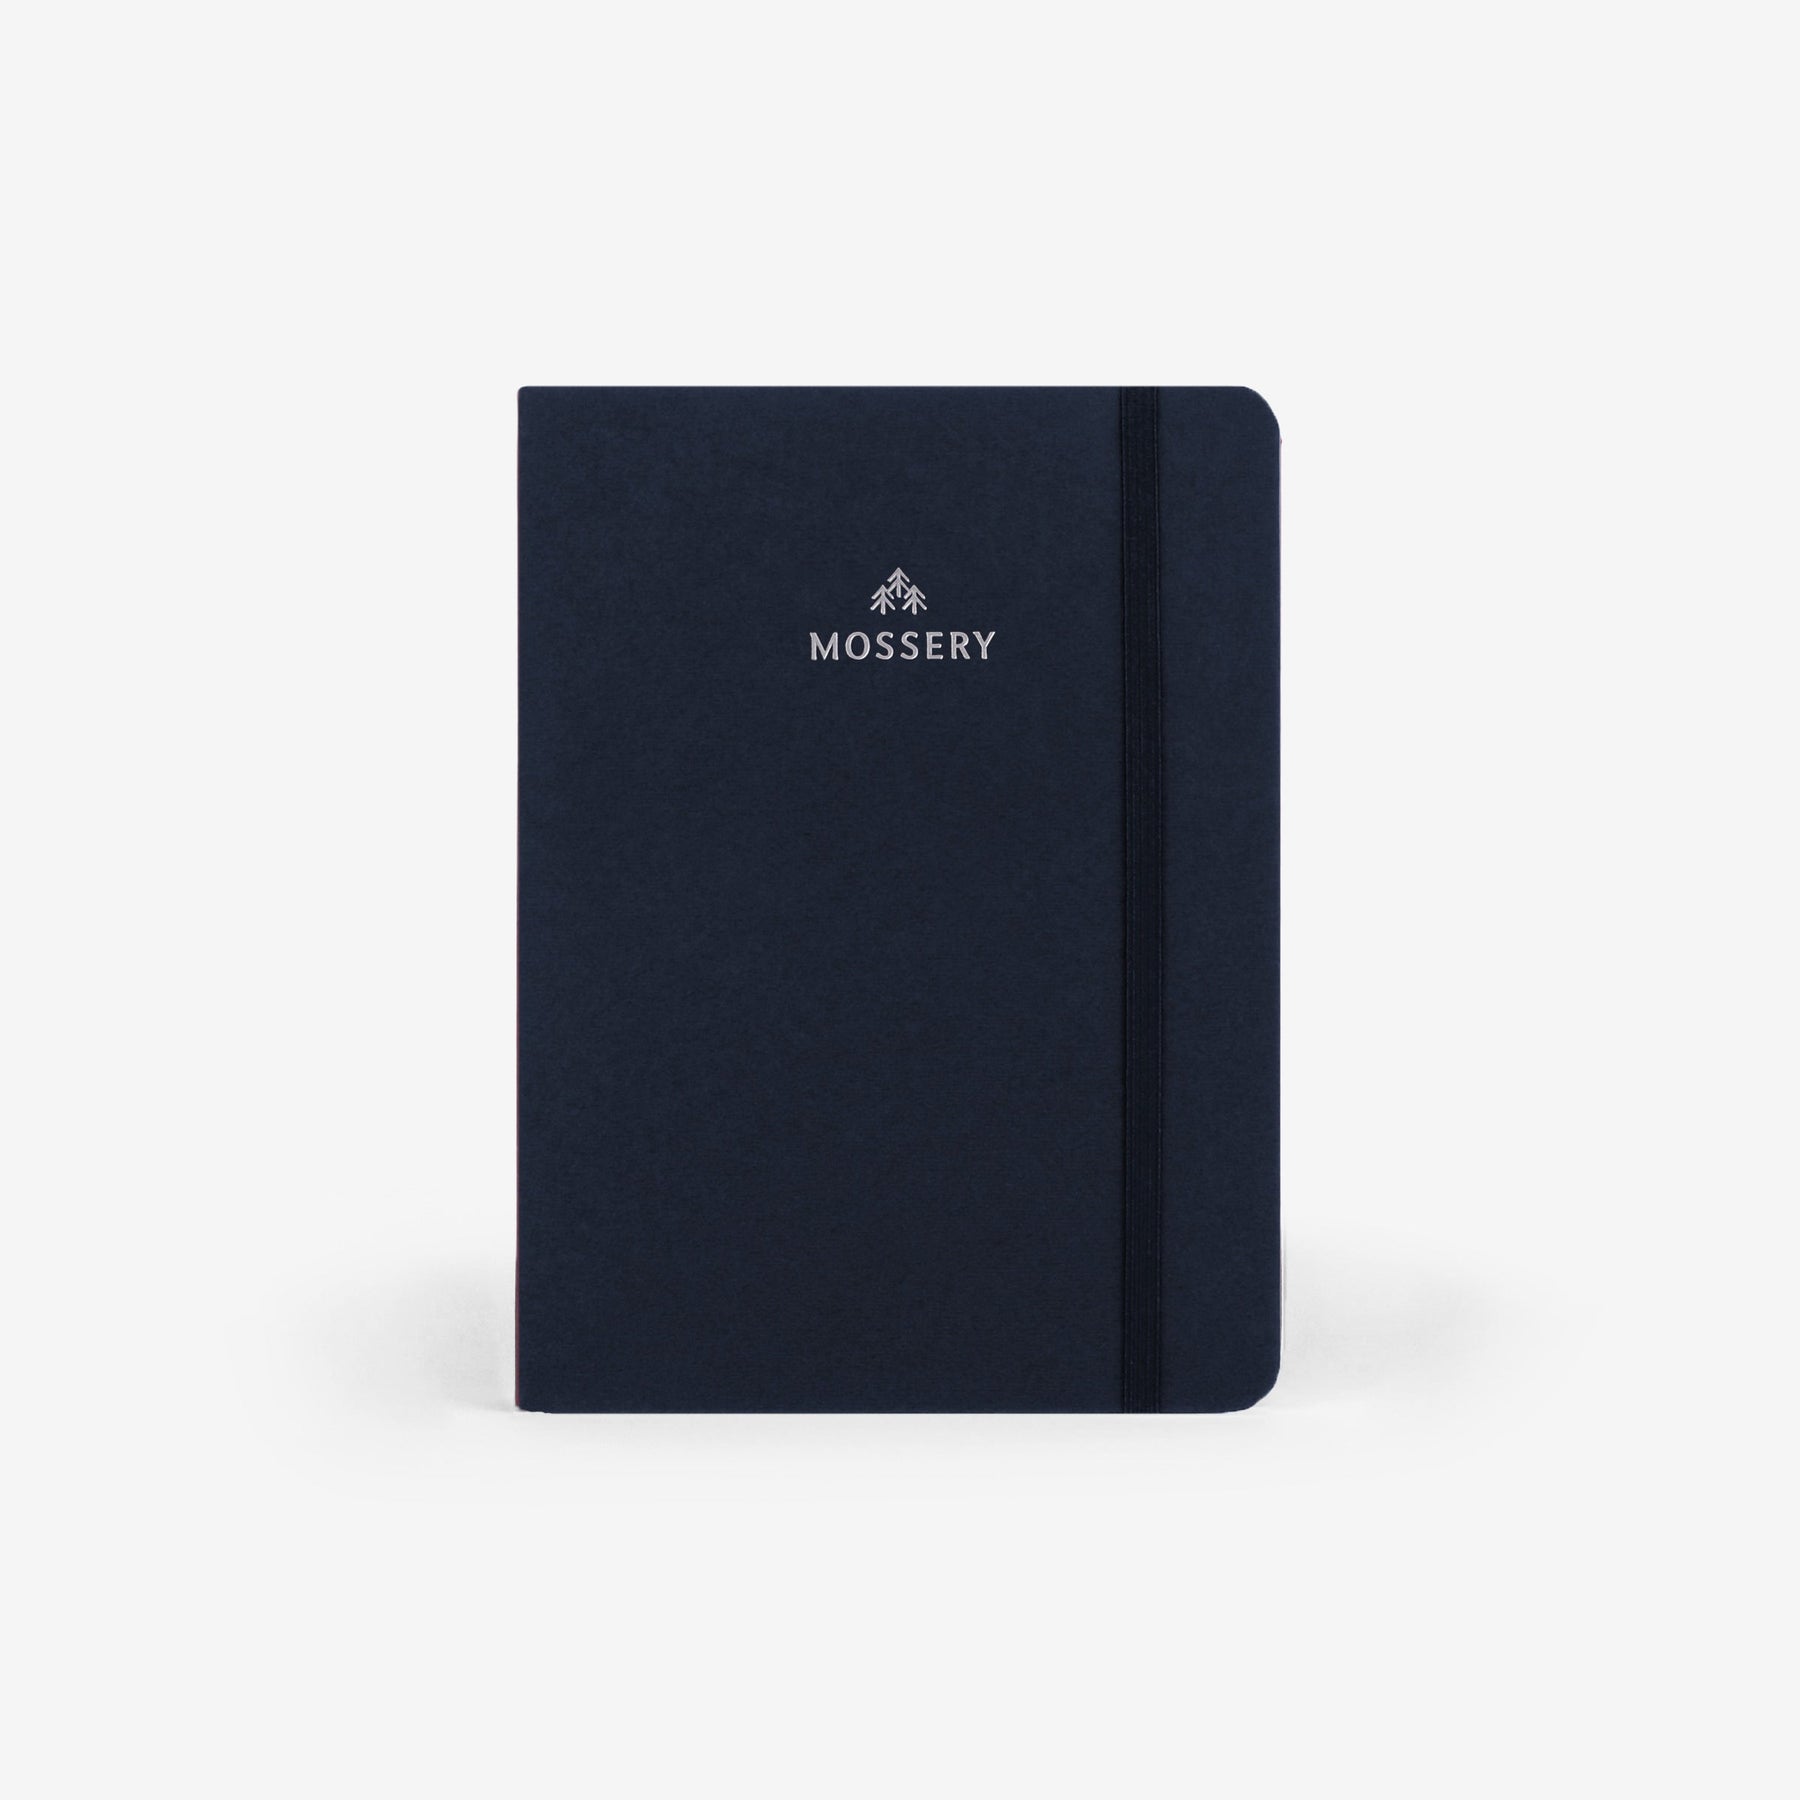 Second Chance: Plain Navy Cover (Mossery Logo)